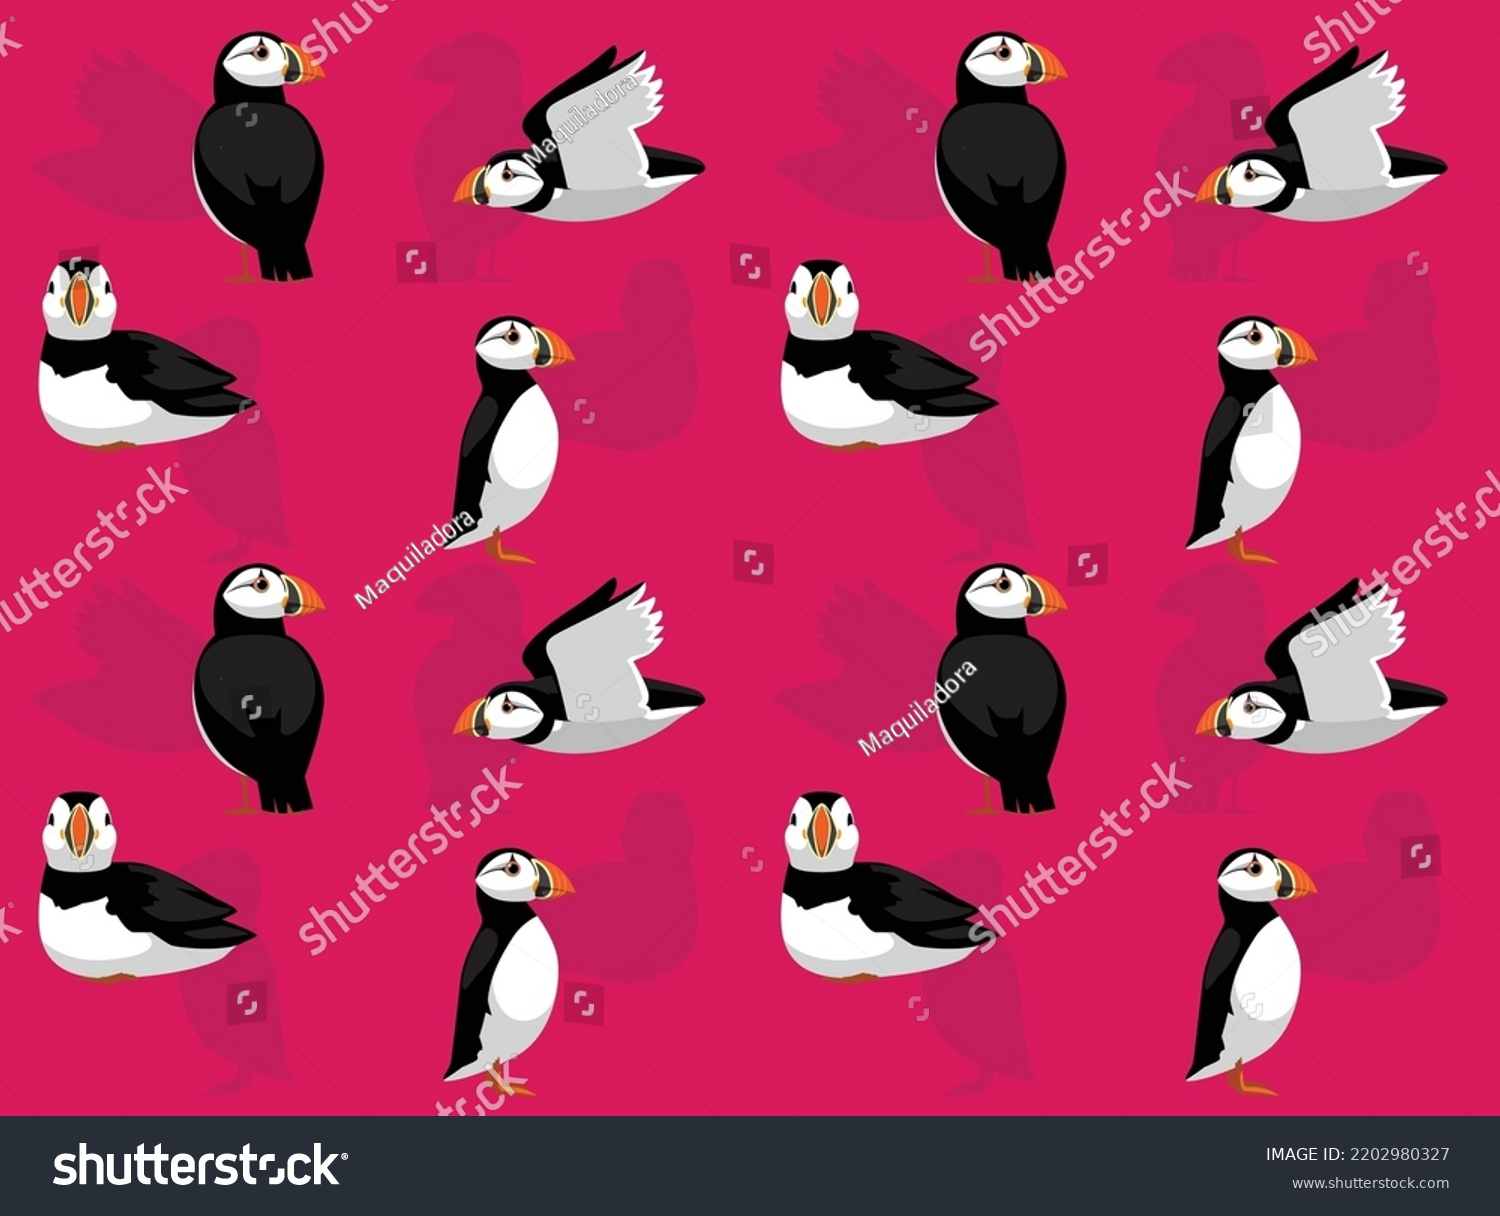 SVG of Animal Bird Atlantic Puffin Poses Cute Cartoon Character Seamless Wallpaper Background svg